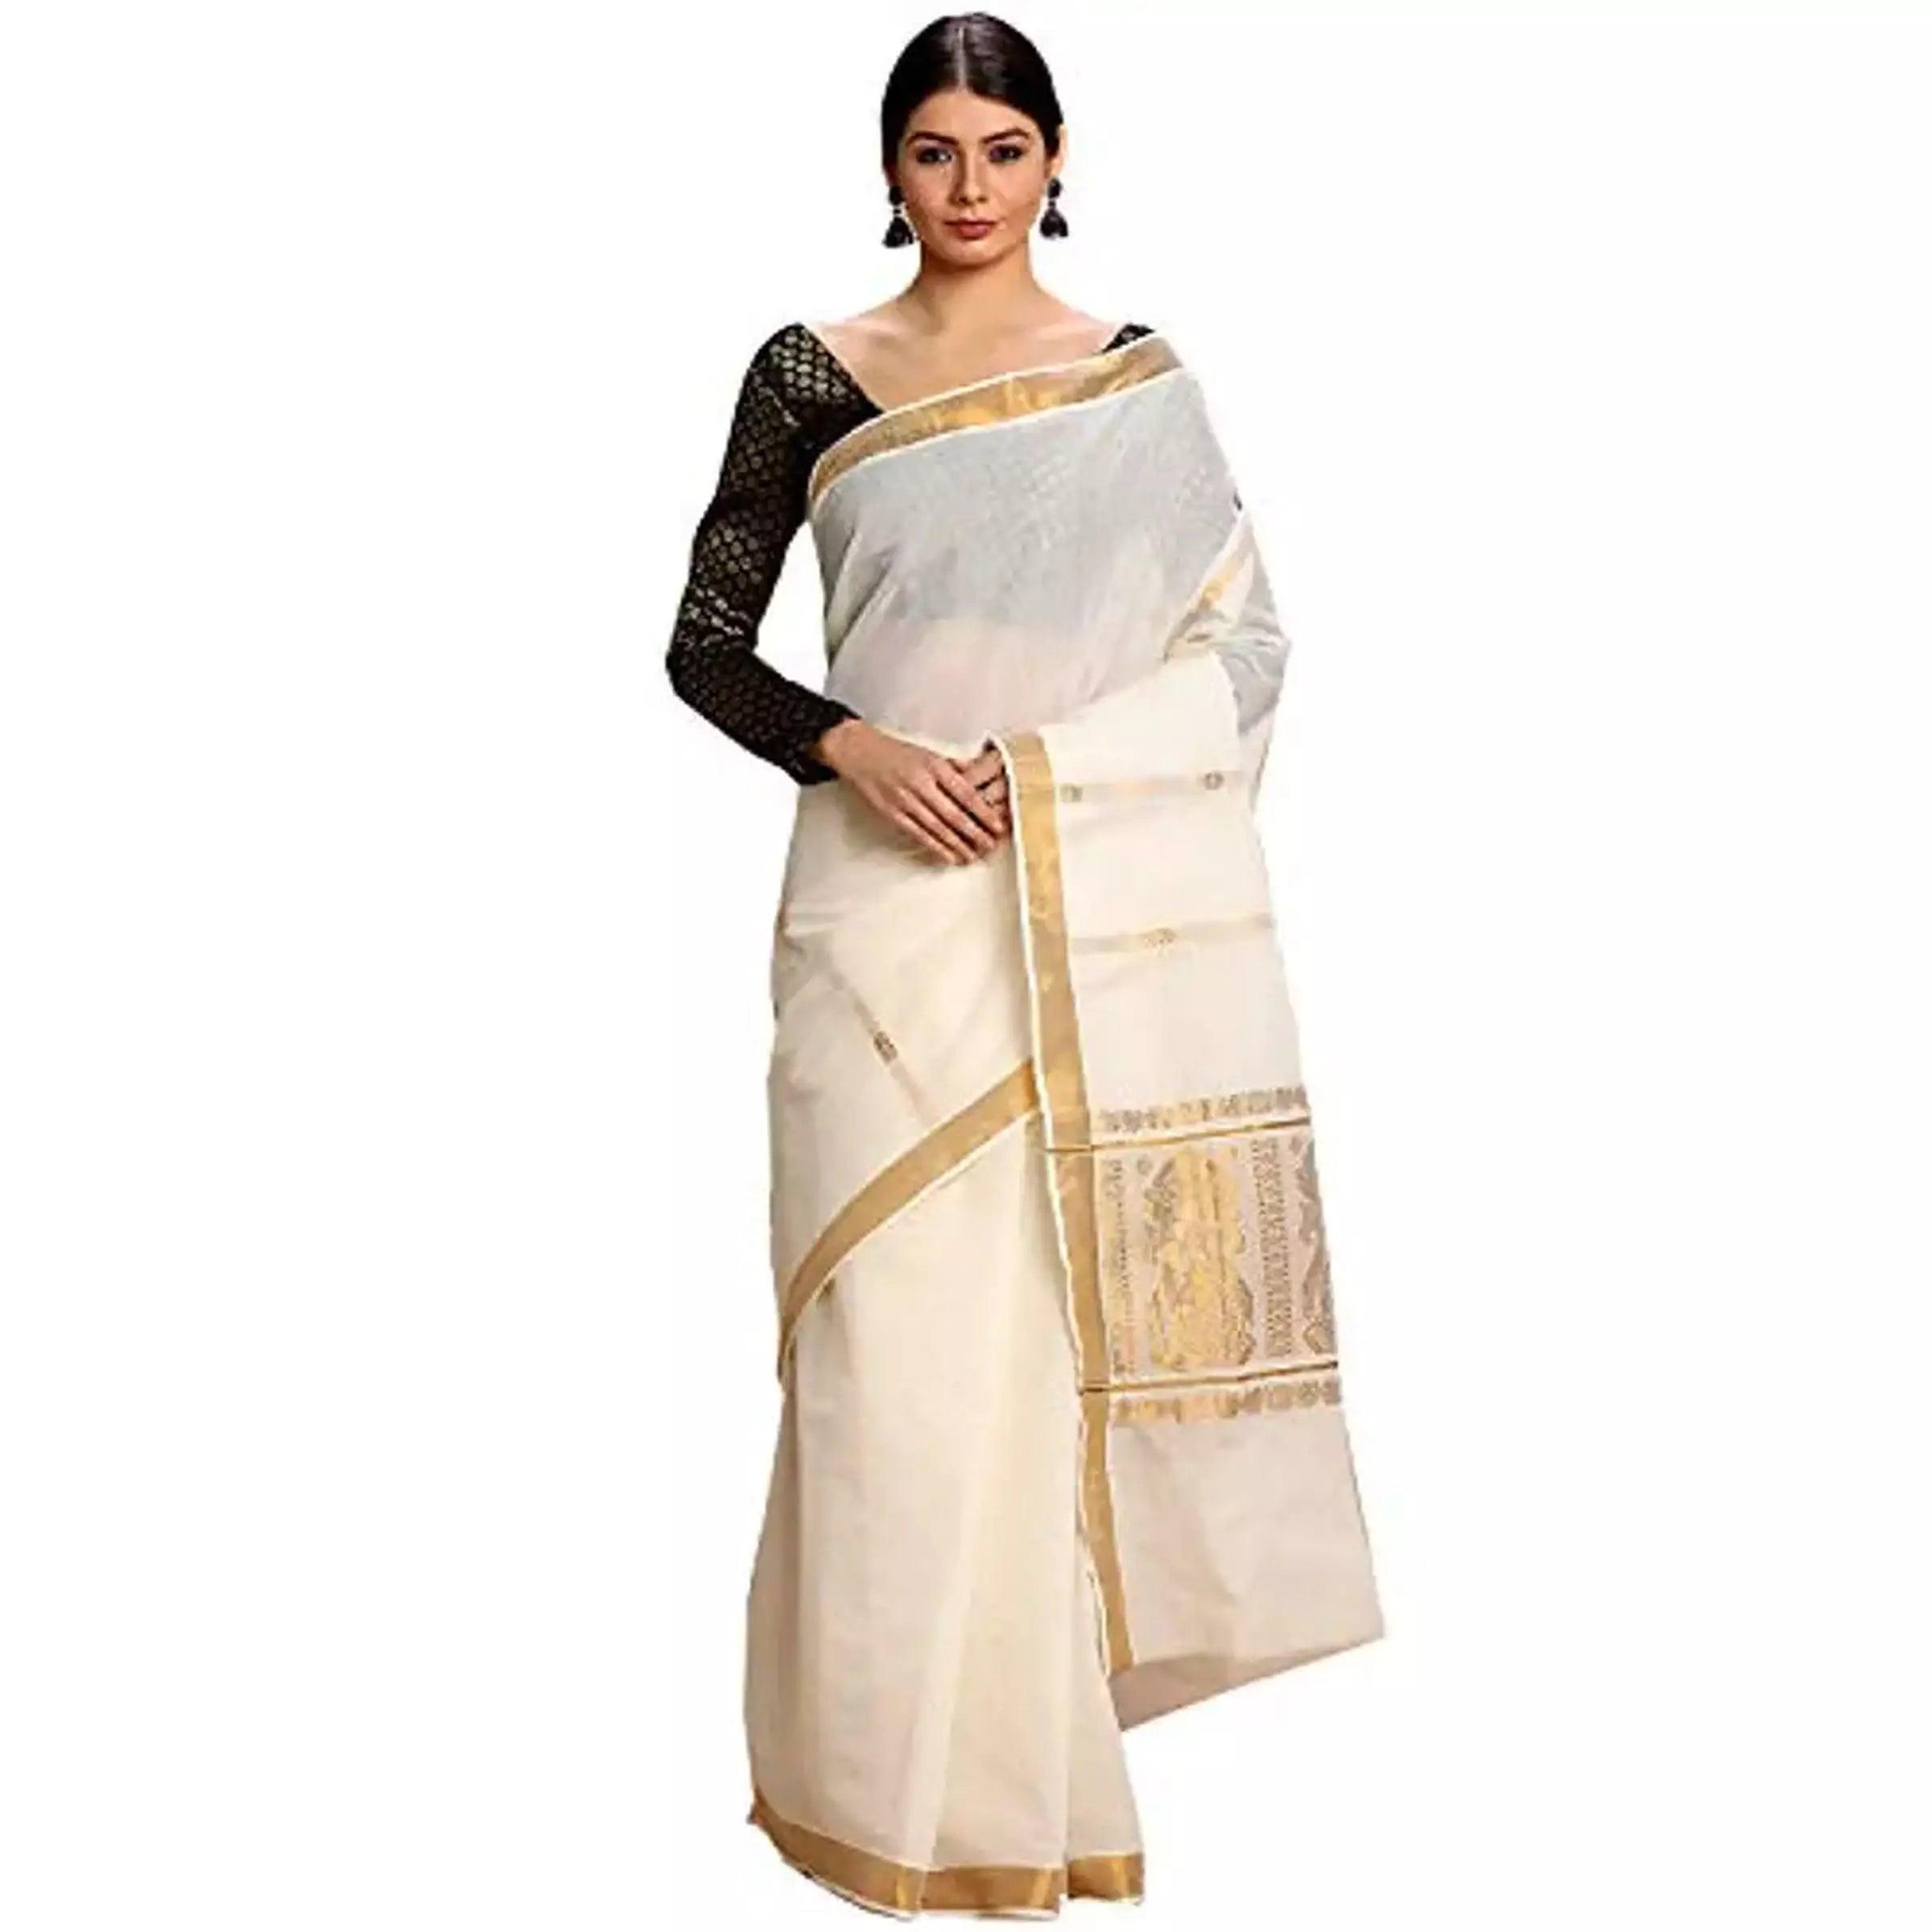 isadoralife fancy Pre-stiched ready to wear saree